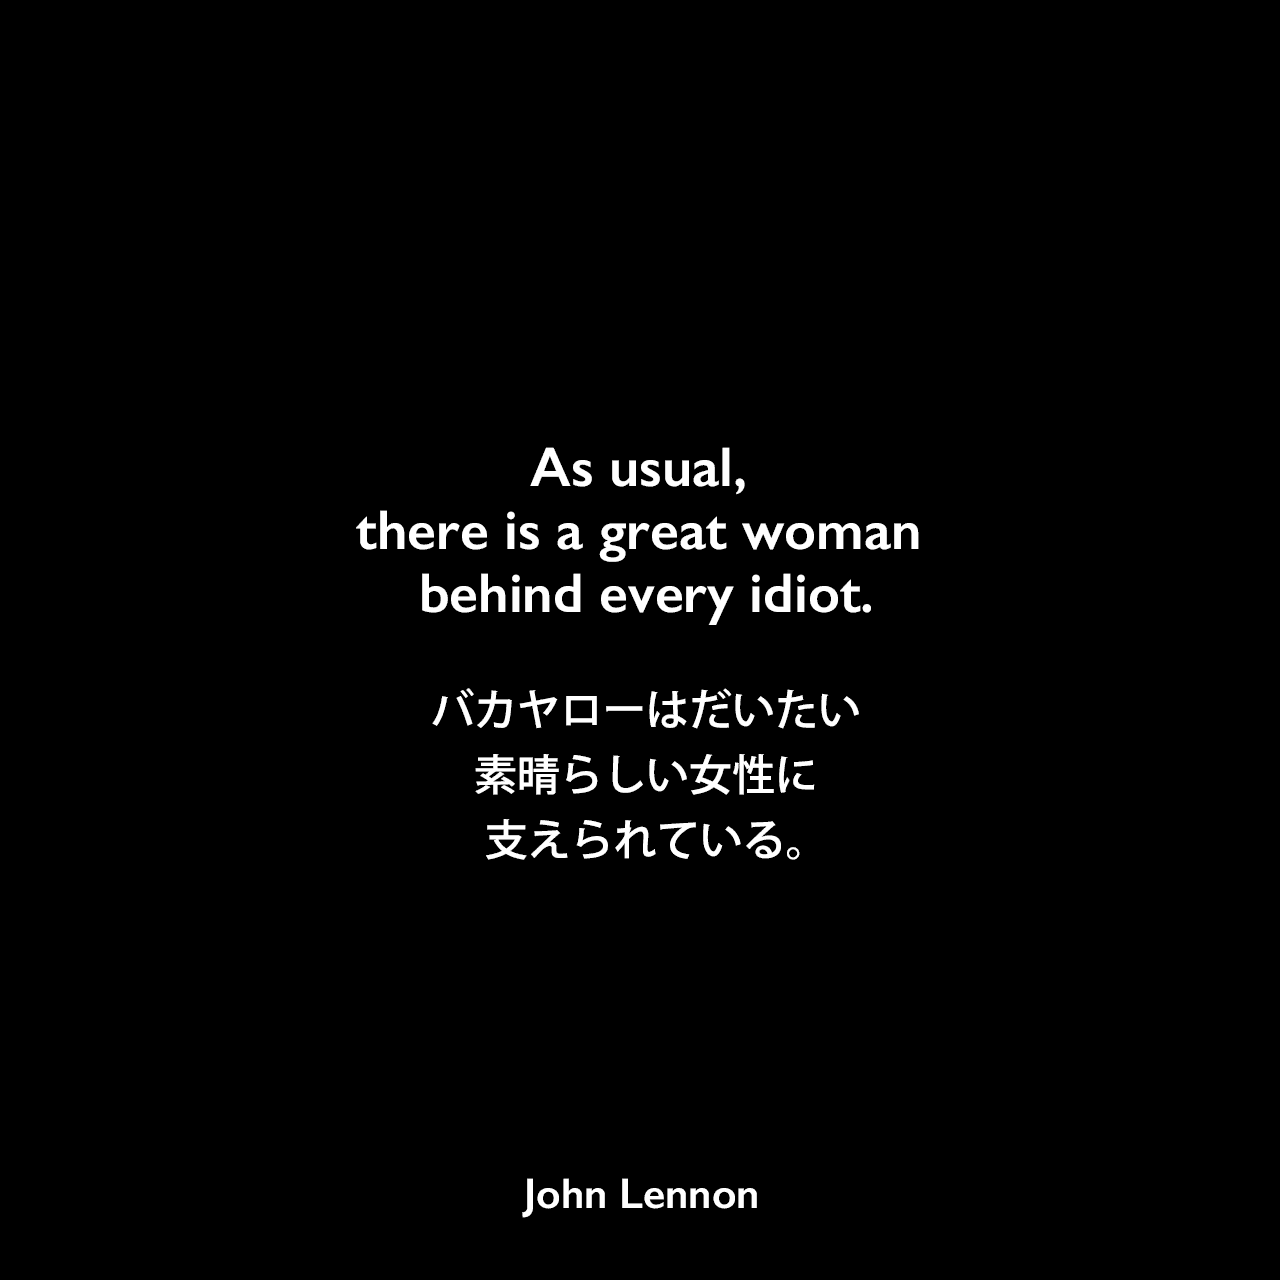 As usual, there is a great woman behind every idiot.バカヤローはだいたい素晴らしい女性に支えられている。John Lennon